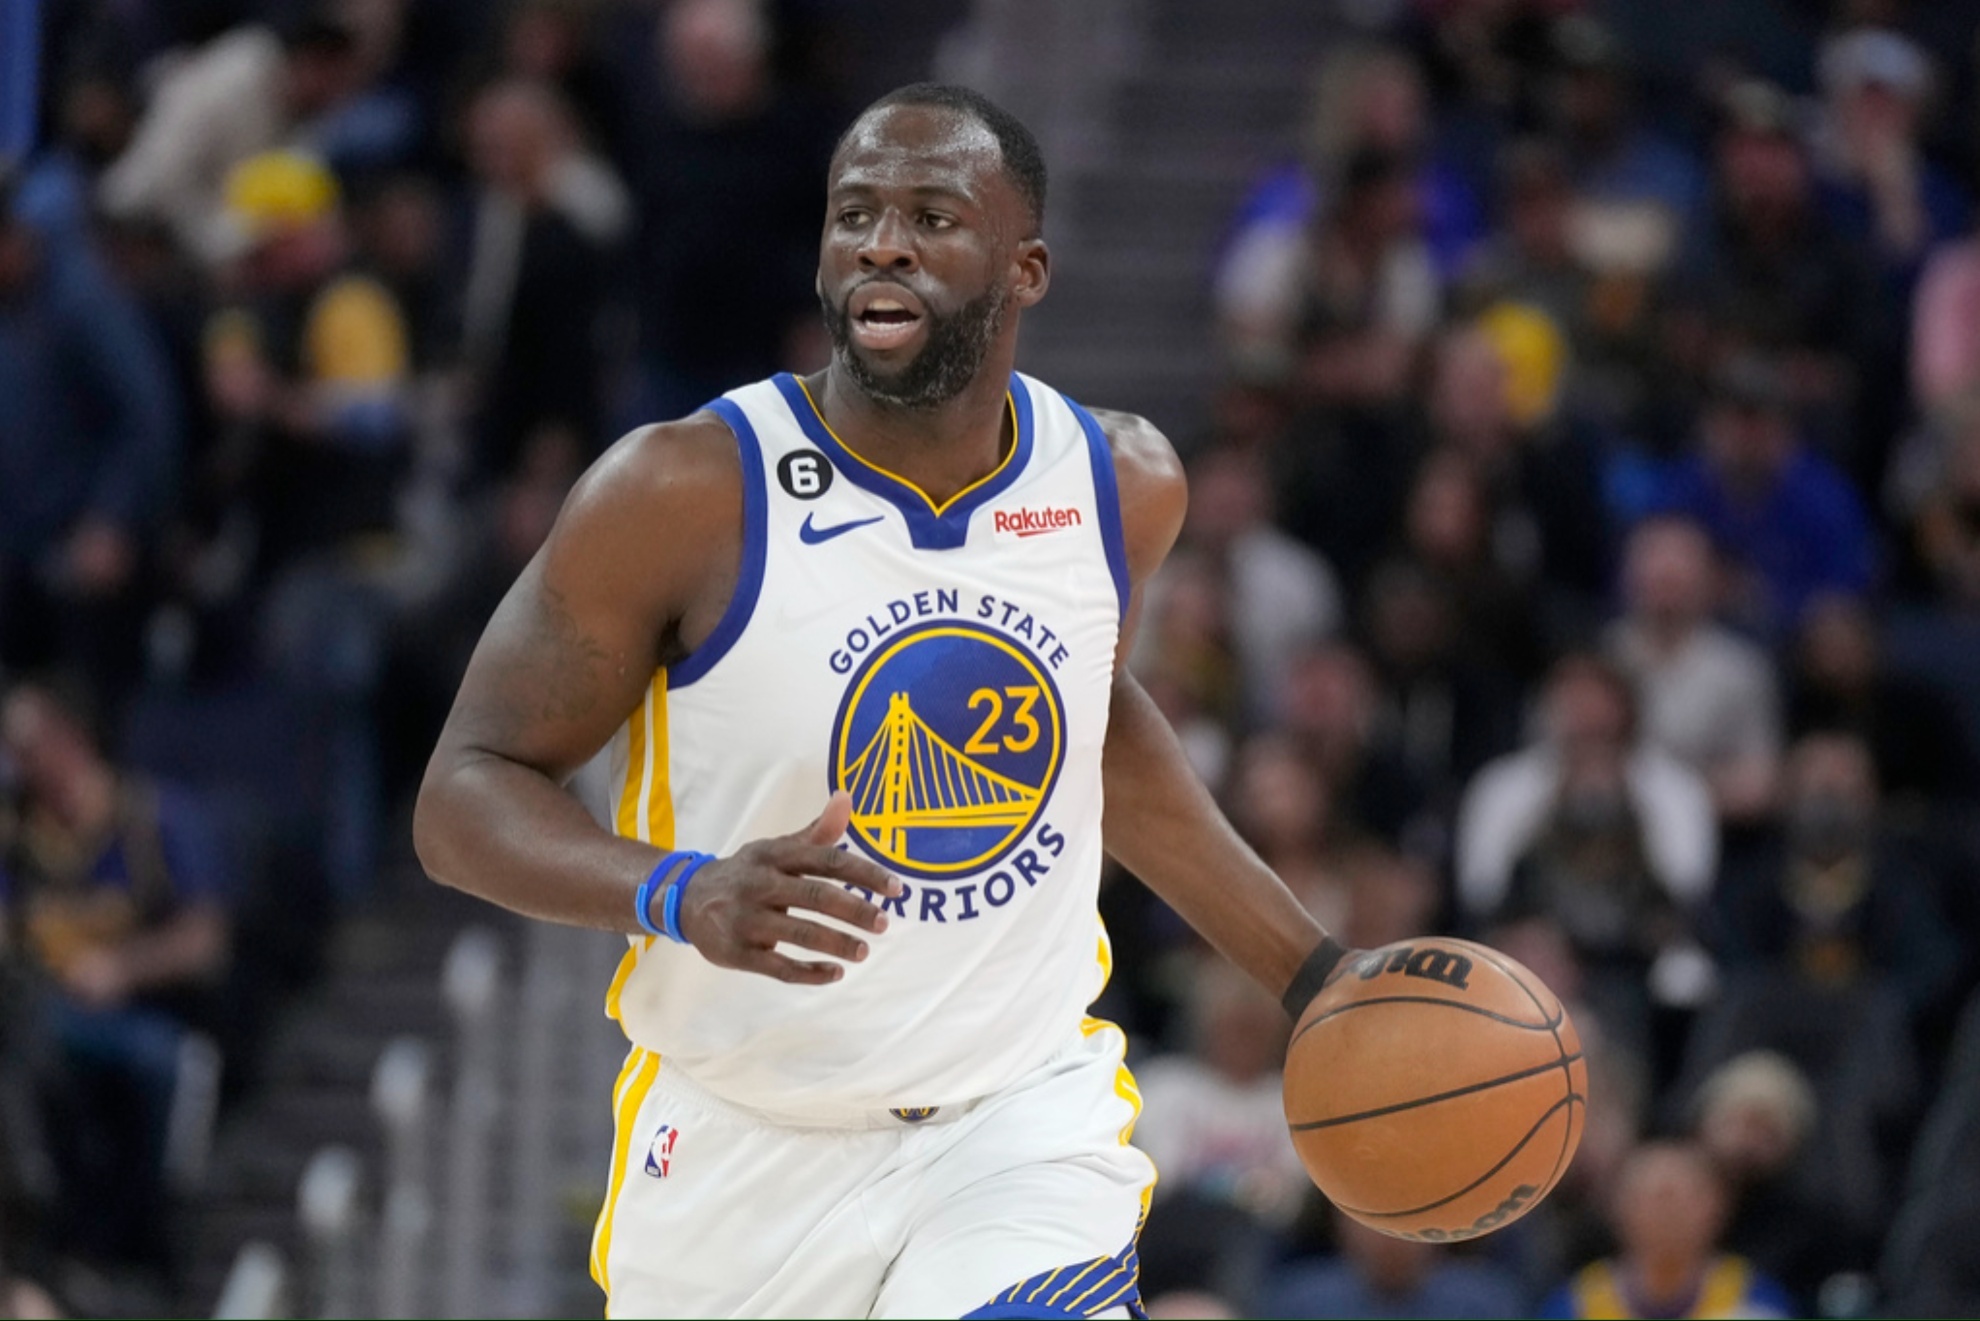 Draymond Green signed a new contract with the Golden State Warriors